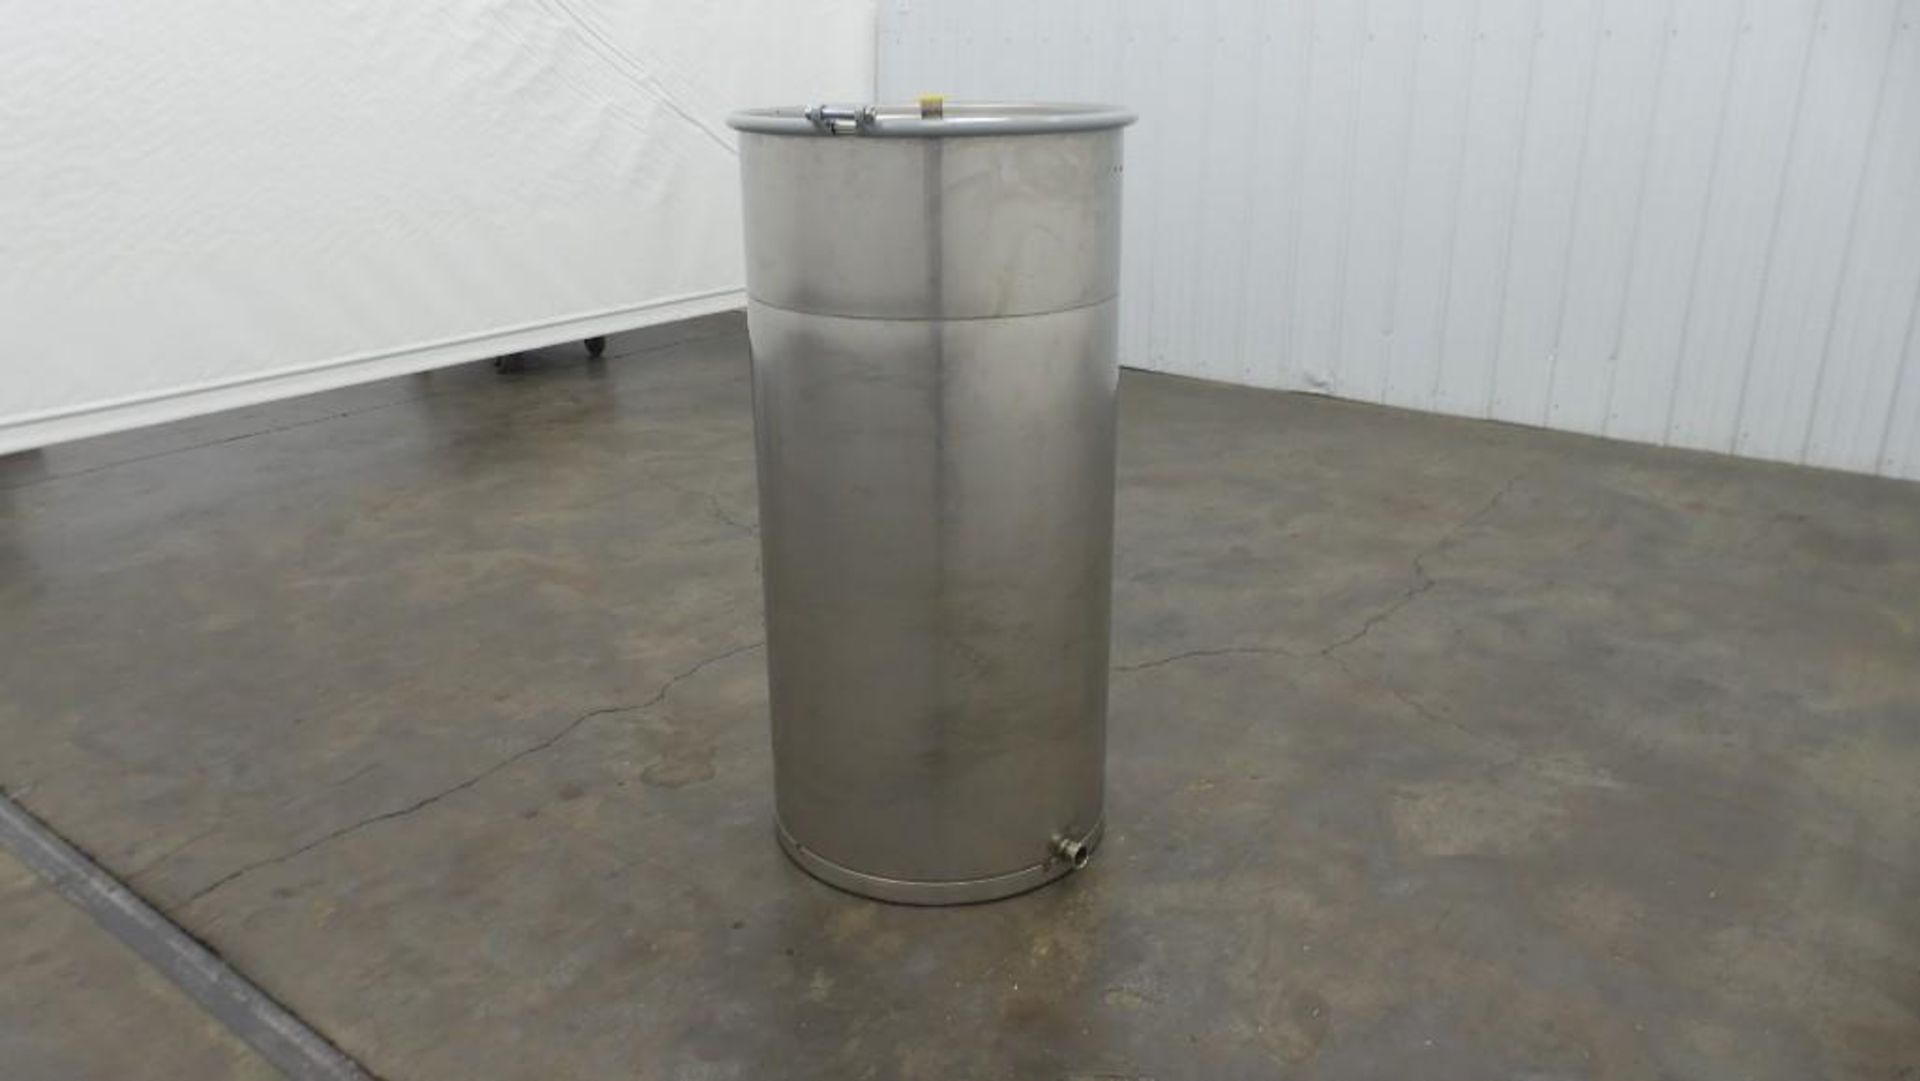 125 Gallon Stainless Steel Single Wall Tank - Image 3 of 6